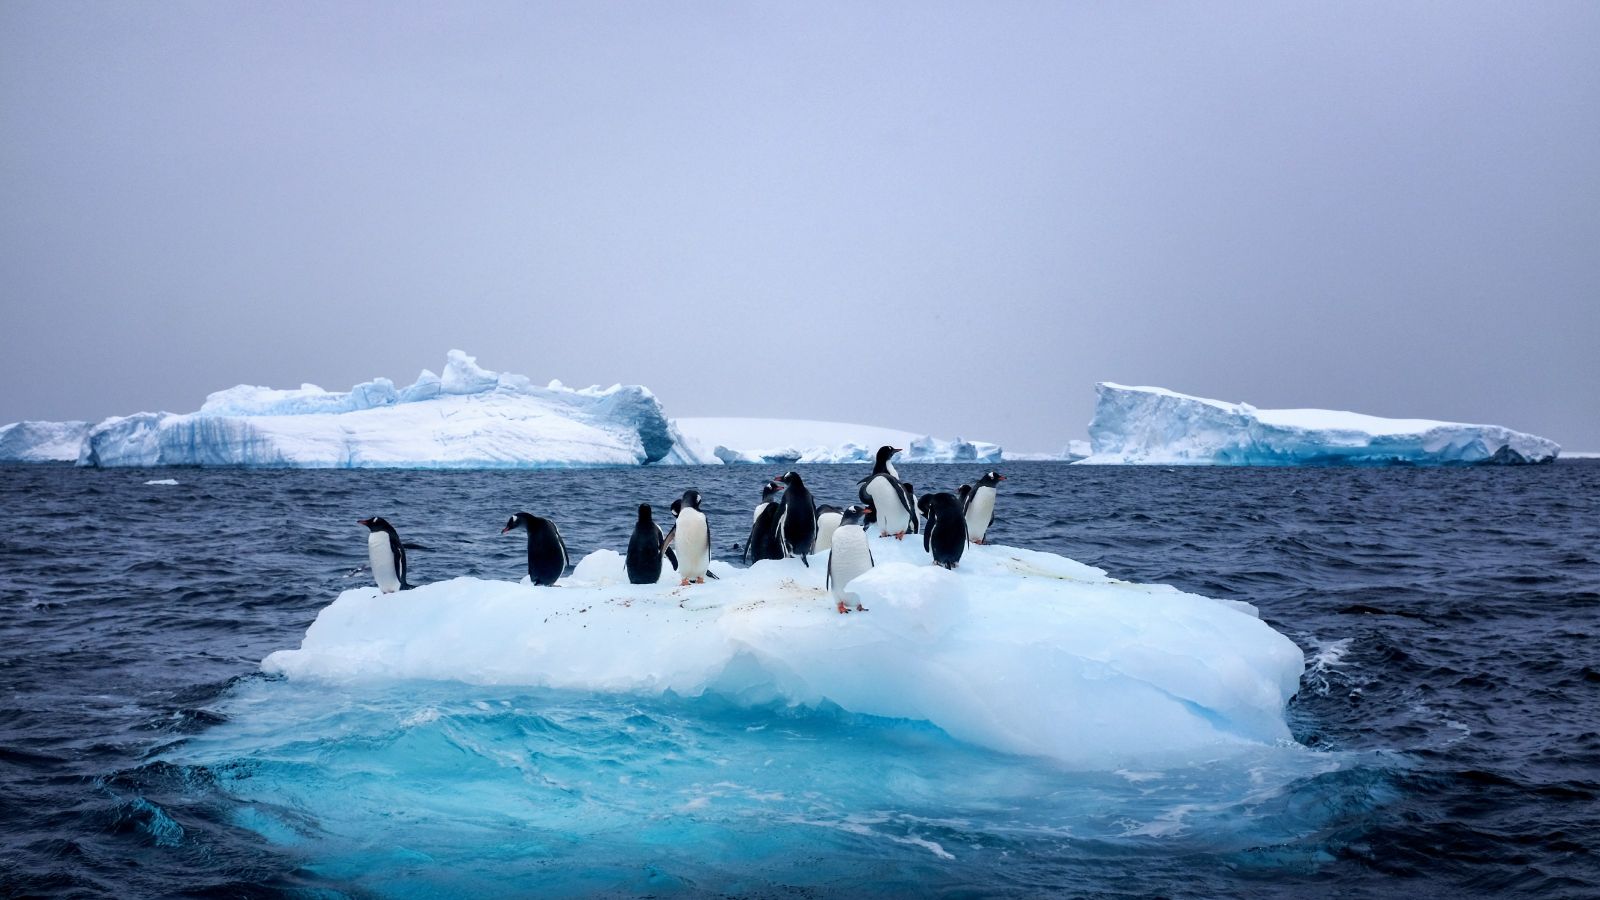 A group of penguins on an Antarctic iceberg